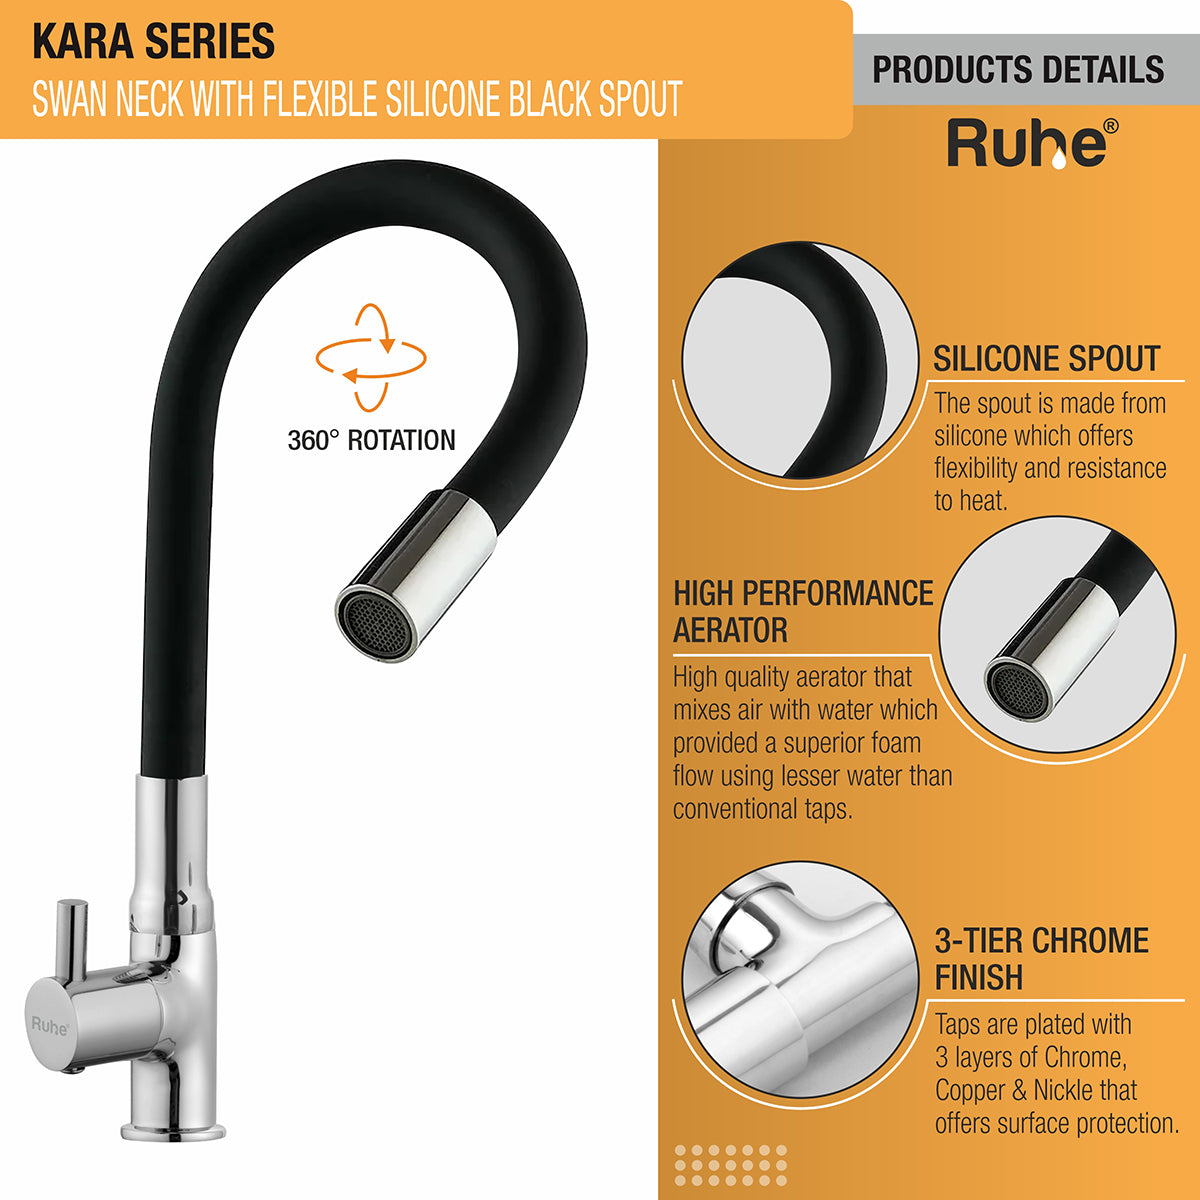 Kara Swan Neck Brass Faucet with Silicone Black Flexible Spout product details with silicone spout, high quality aerator, and 3 layer chrome plated